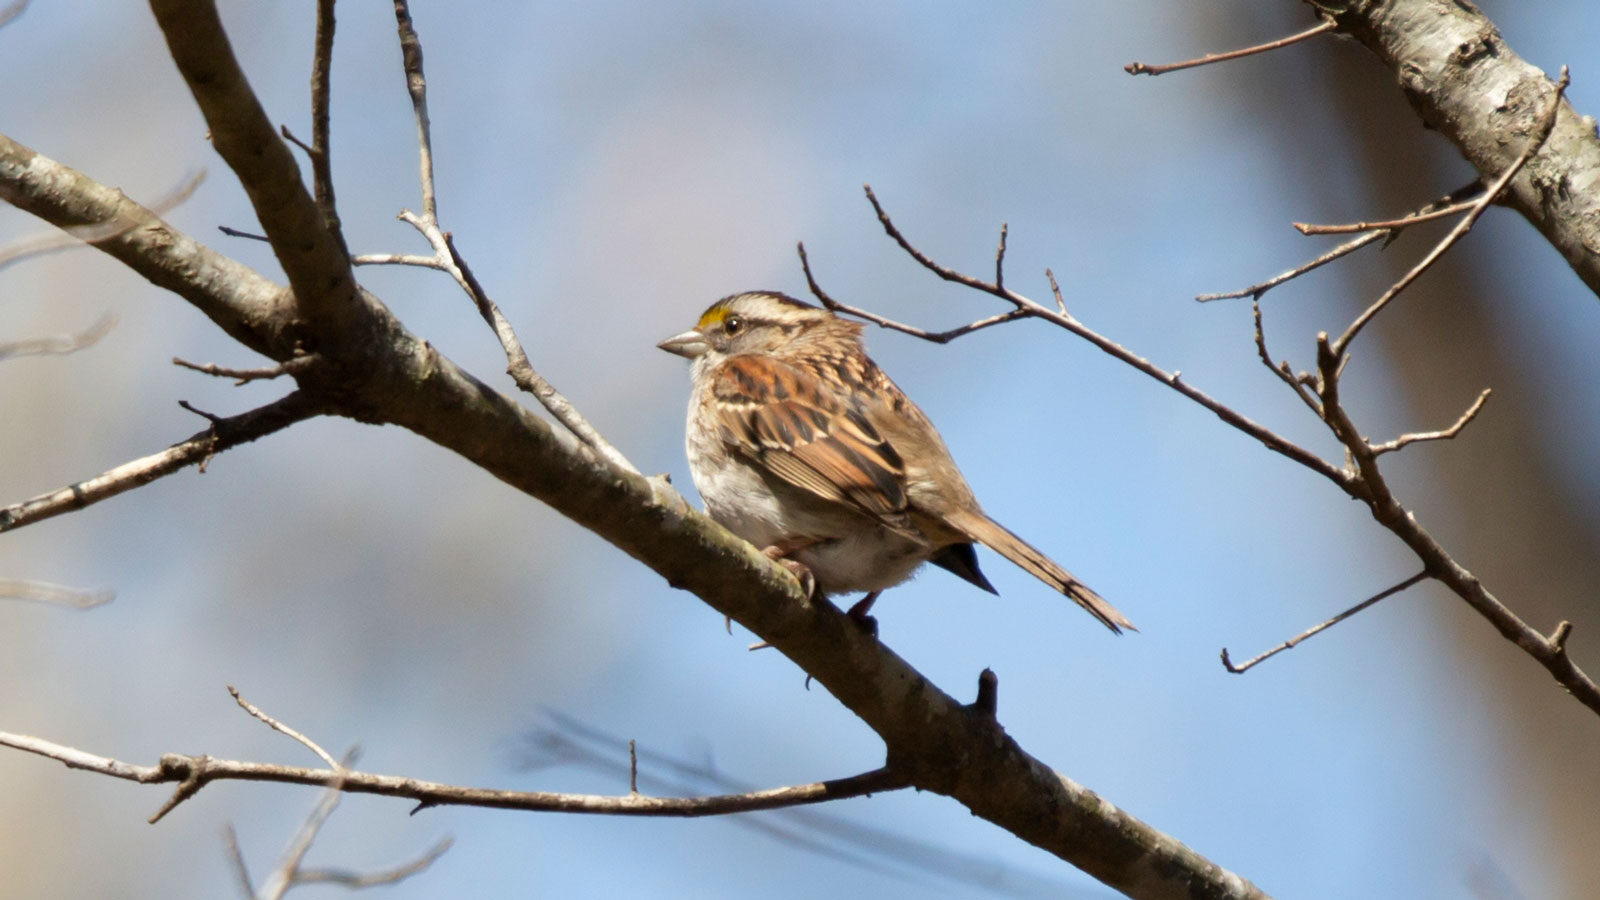 White-throated sparrow looking out from its perch on a tree limb